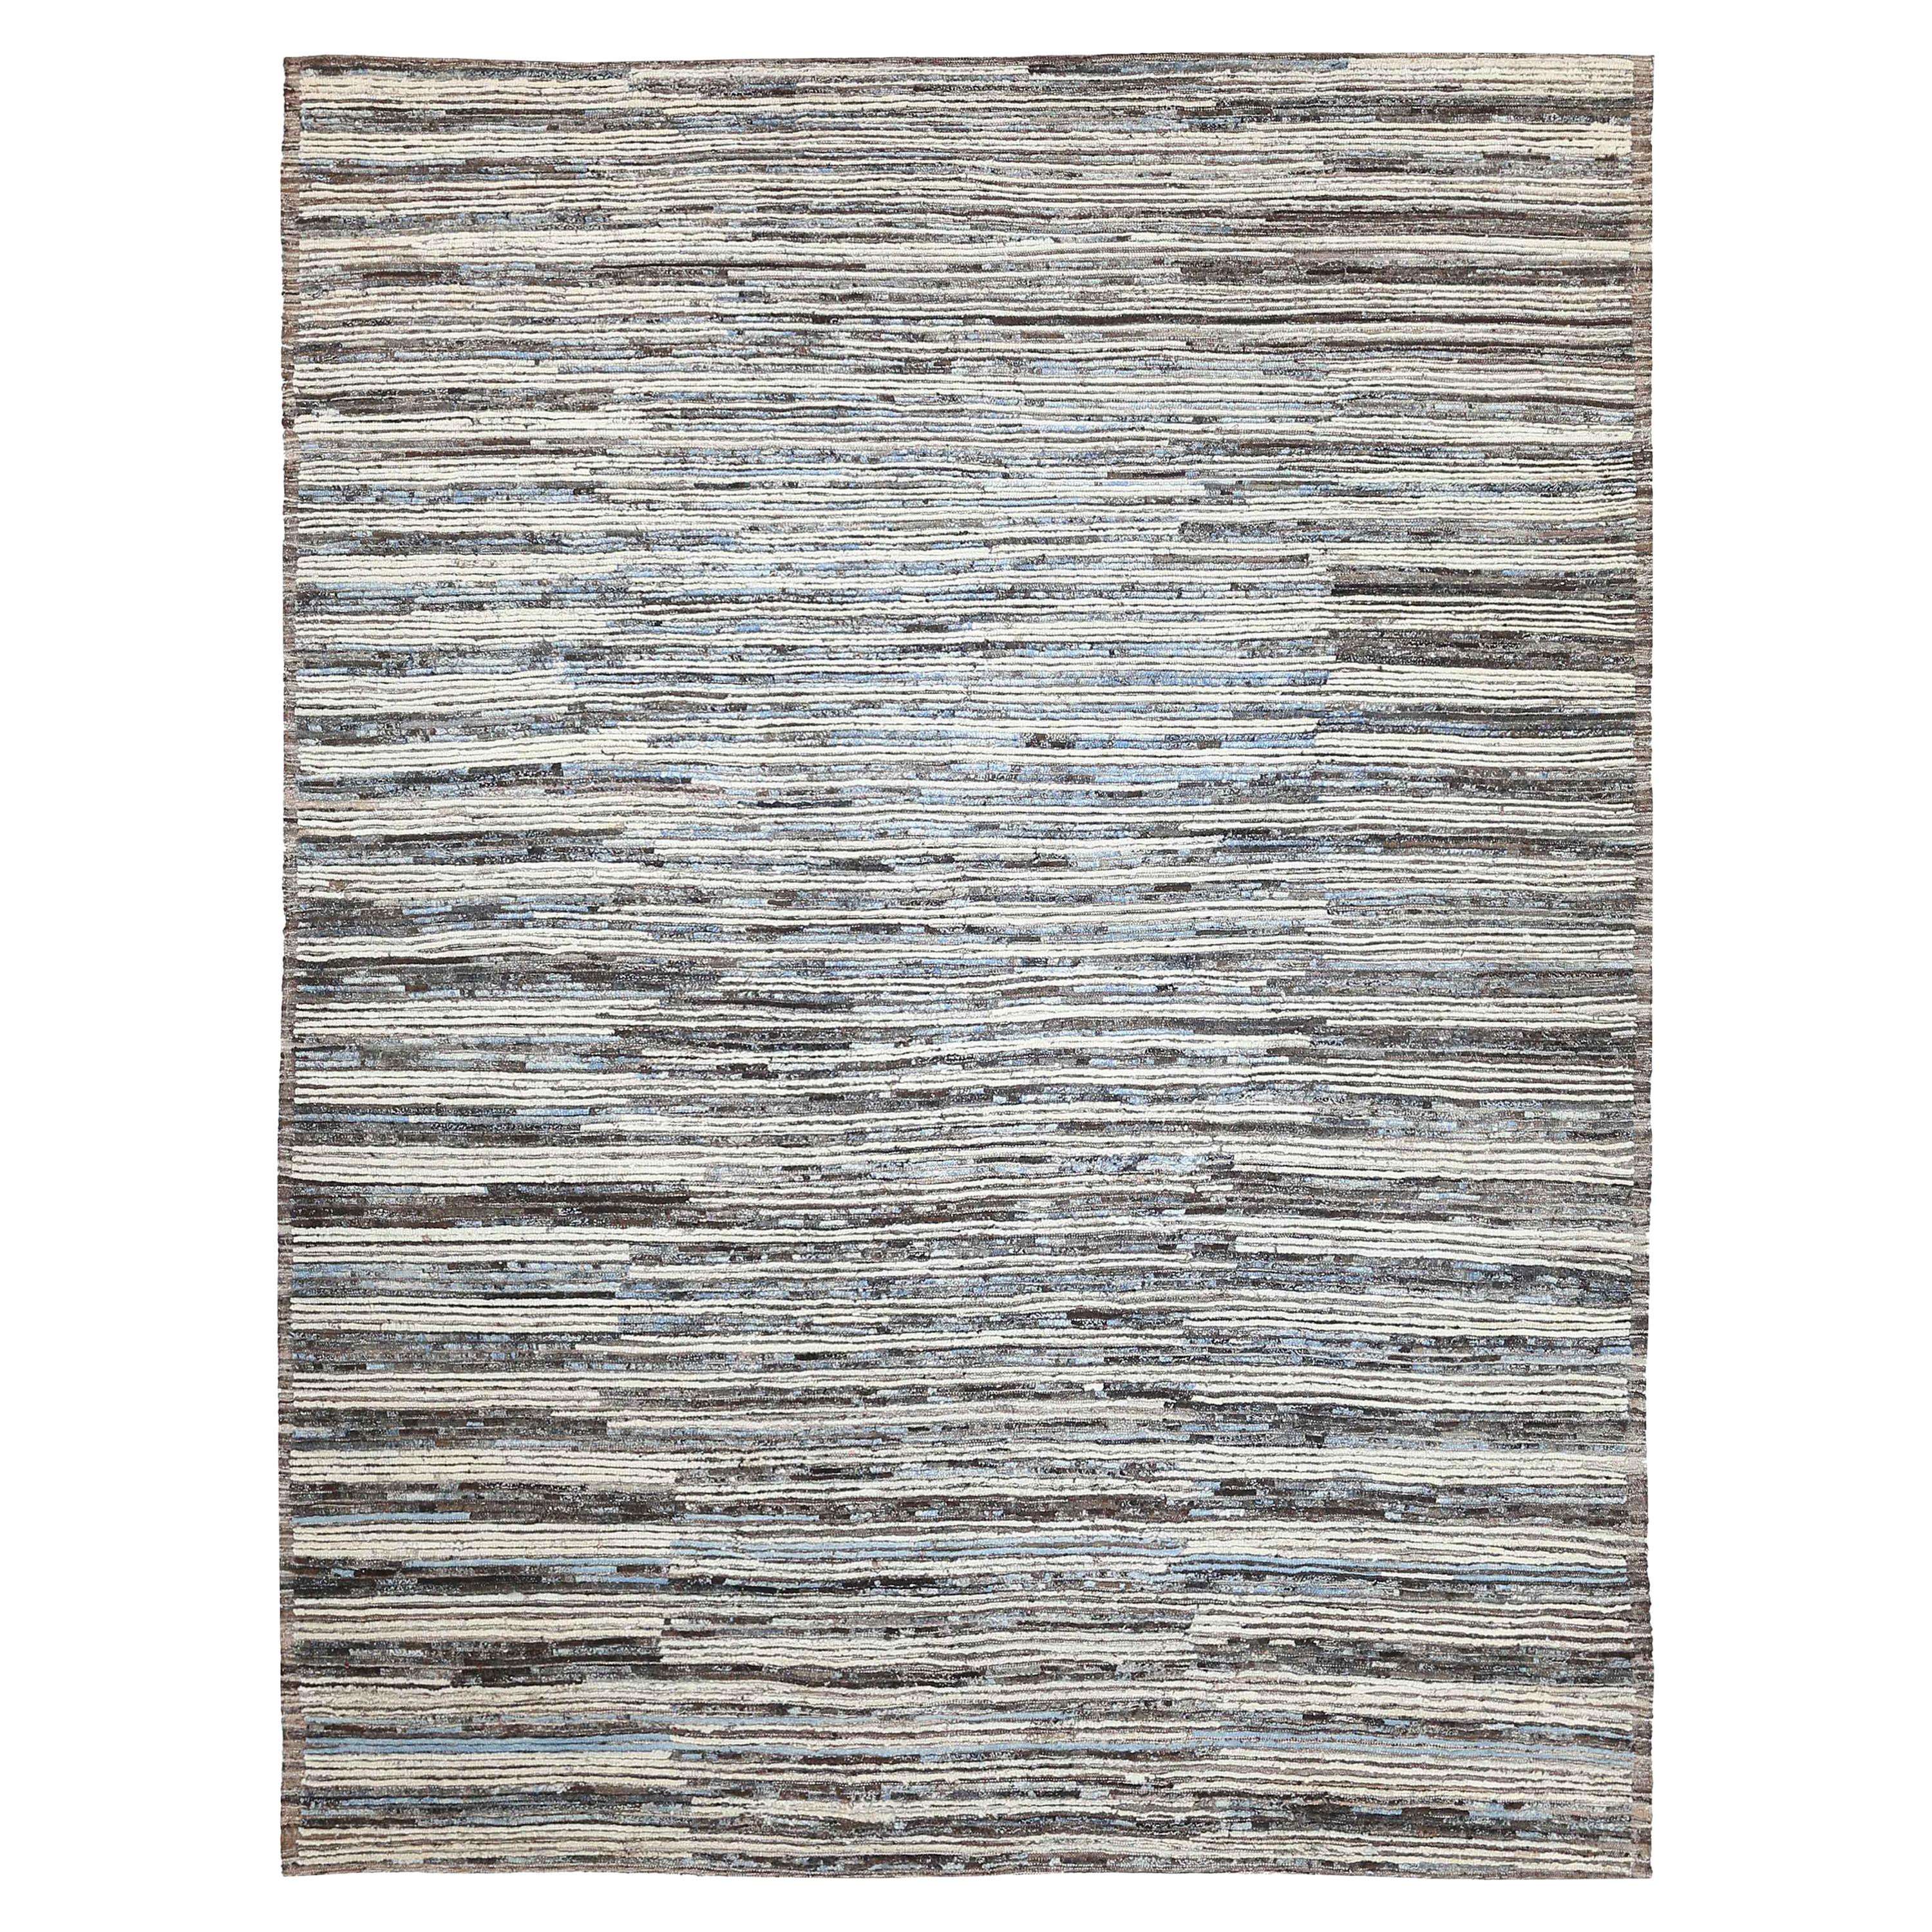 Modern Afghan Moroccan Style Rug with Sky Blue and Brown Streaks on Ivory Field